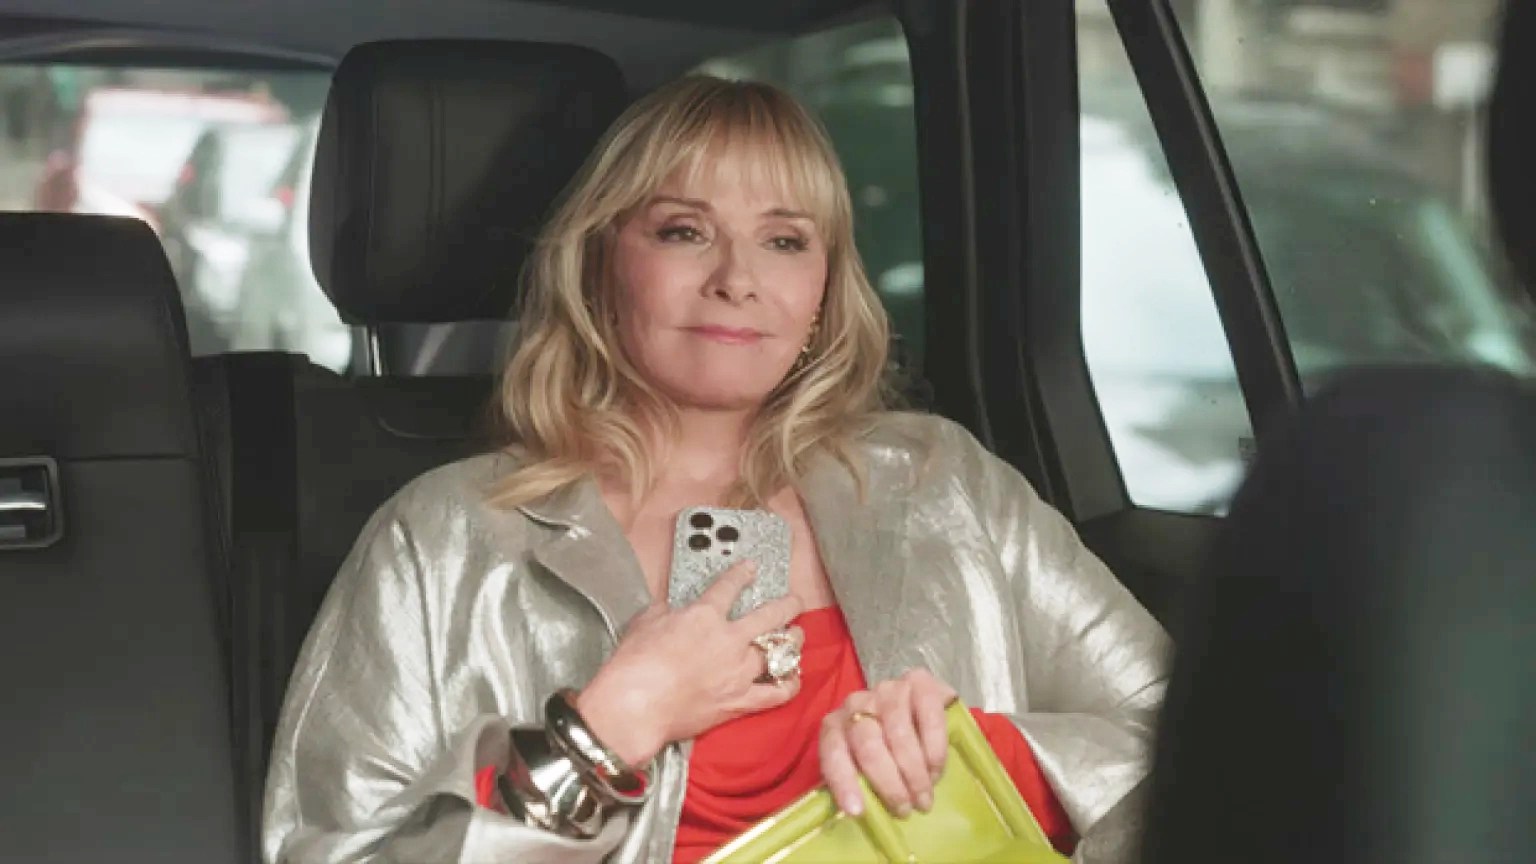 This Is The Exact Face Mask Kim Cattrall Used For Her Iconic Samantha Jones Comeback On ‘AJLT’